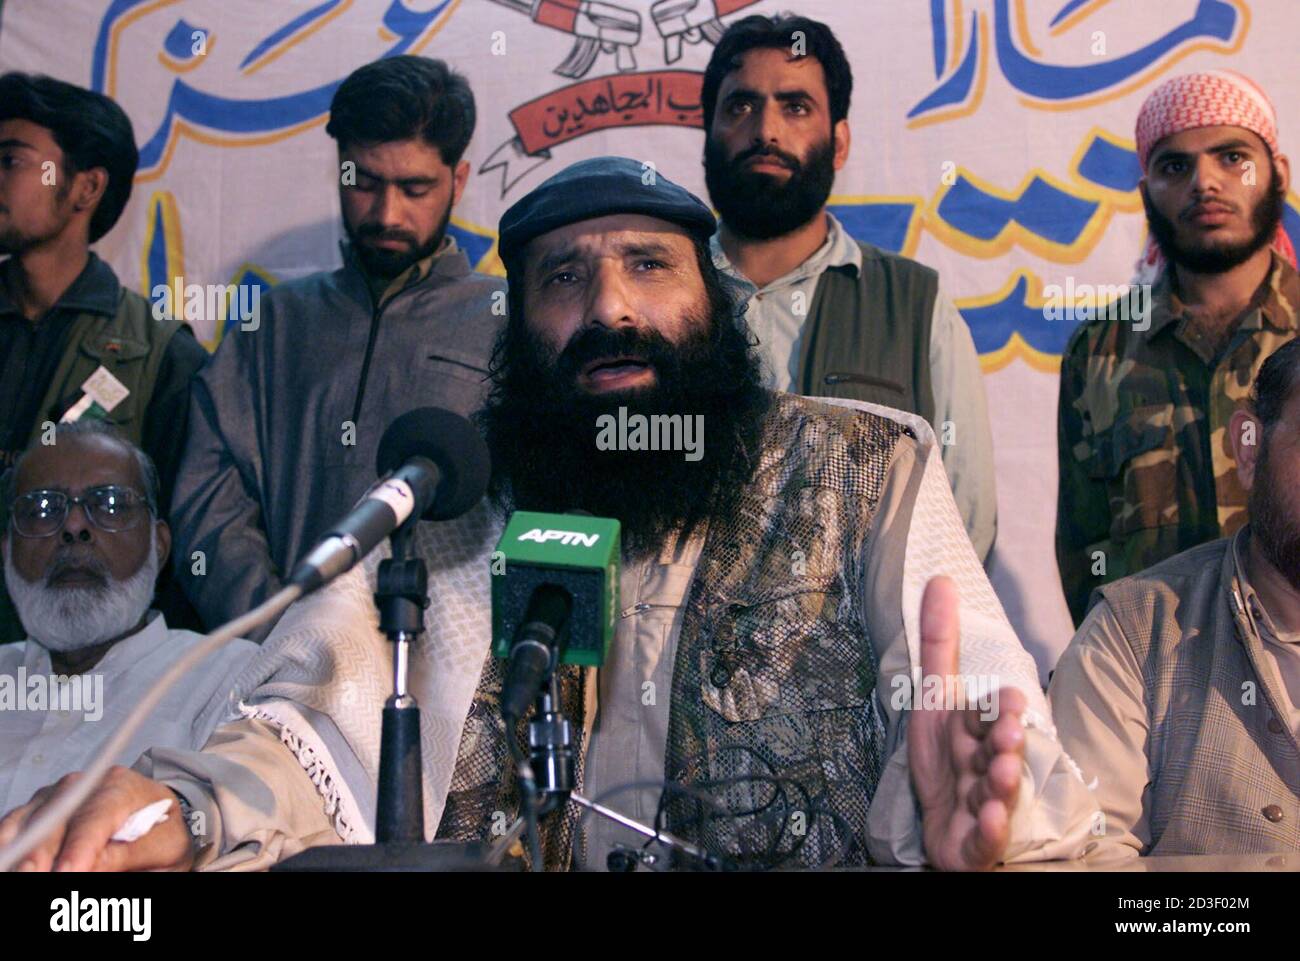 syed-salahuddin-supreme-commander-of-kashmiri-militant-group-hizbul-mujahideen-speaks-during-a-news-conference-in-karachi-on-november-24-2000-salahuddin-said-we-can-accept-indian-offer-on-a-ceasefire-in-disputed-kashmir-only-if-india-announces-start-of-talks-with-pakistan-and-kashmiri-groups-to-resolve-53-years-old-conflict-nearly-all-the-militant-groups-have-rejected-an-offer-by-indian-authorities-to-a-ceasefire-during-the-muslim-fasting-month-of-ramadan-starting-next-week-and-vowed-to-step-up-armed-operations-against-indian-military-targets-in-kashmir-2d3f02m.jpg